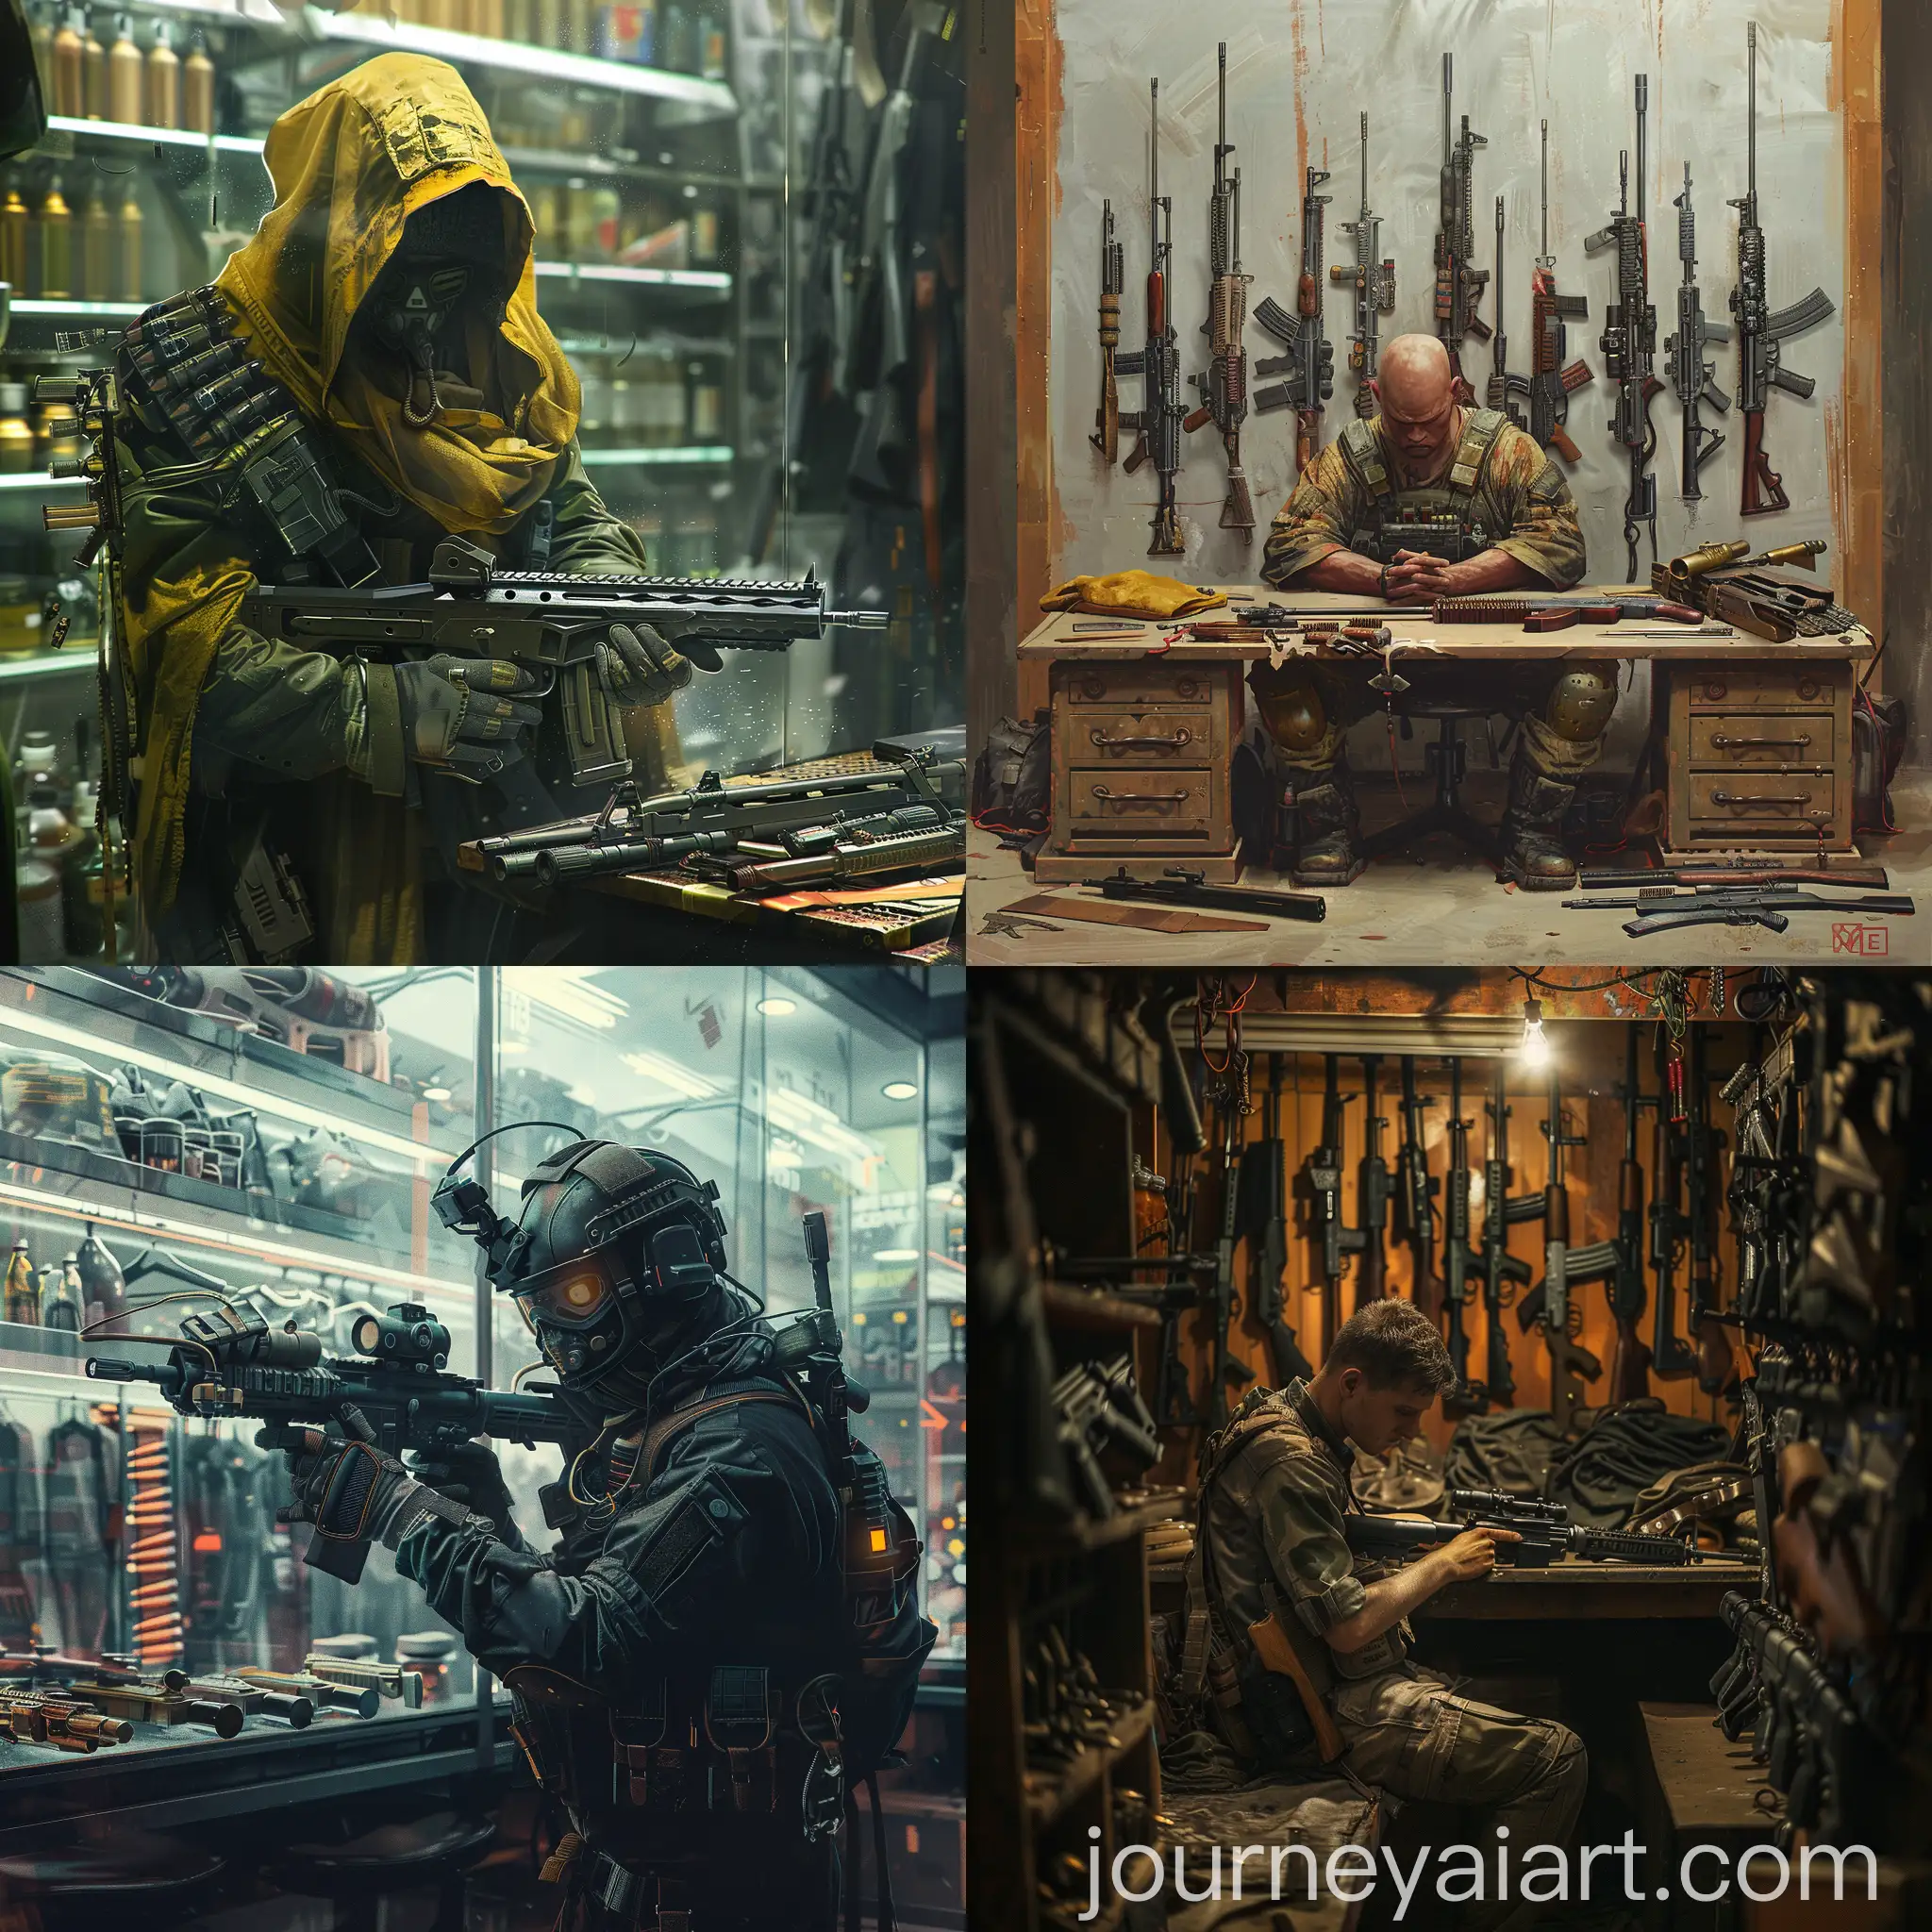 Weapons-Dealer-in-Futuristic-Setting